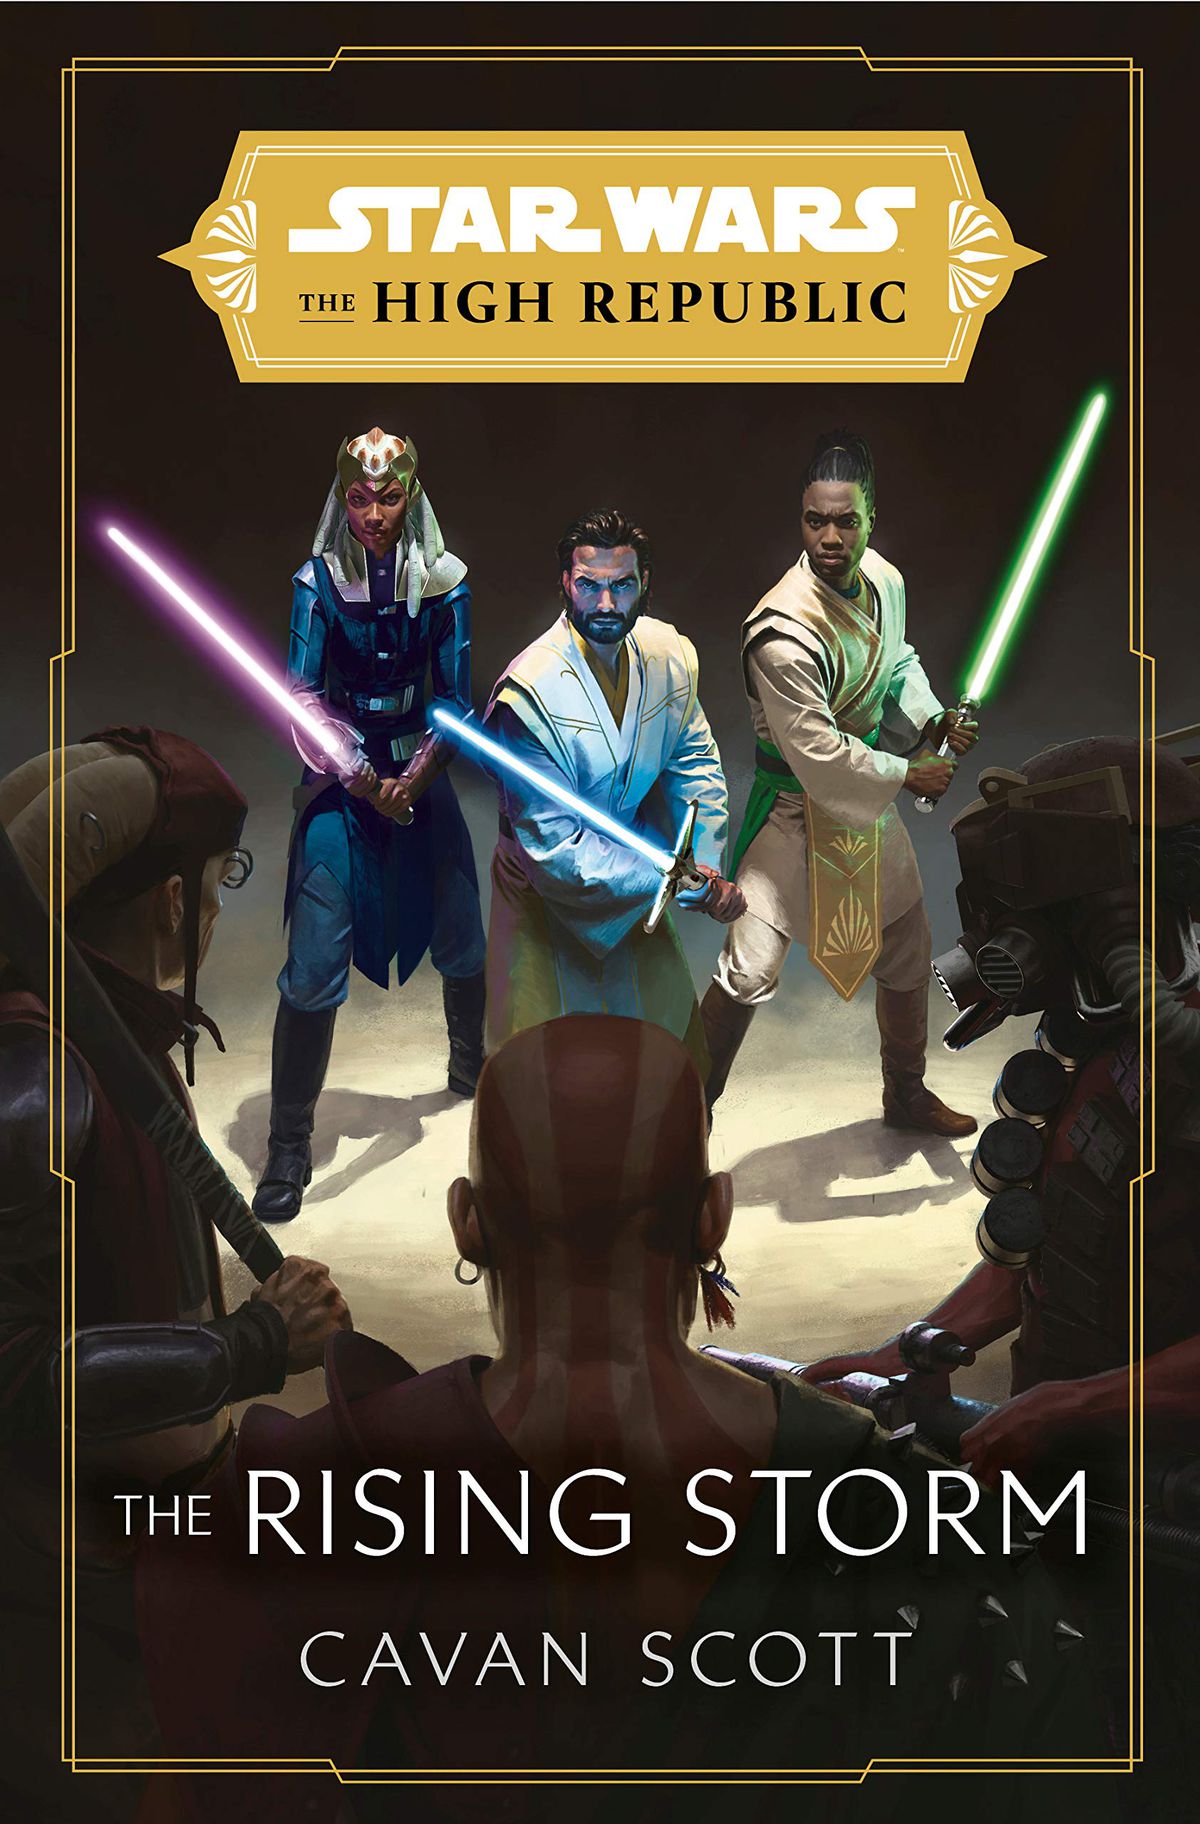 Star Wars: The High Republic - The Rising Storm book cover 